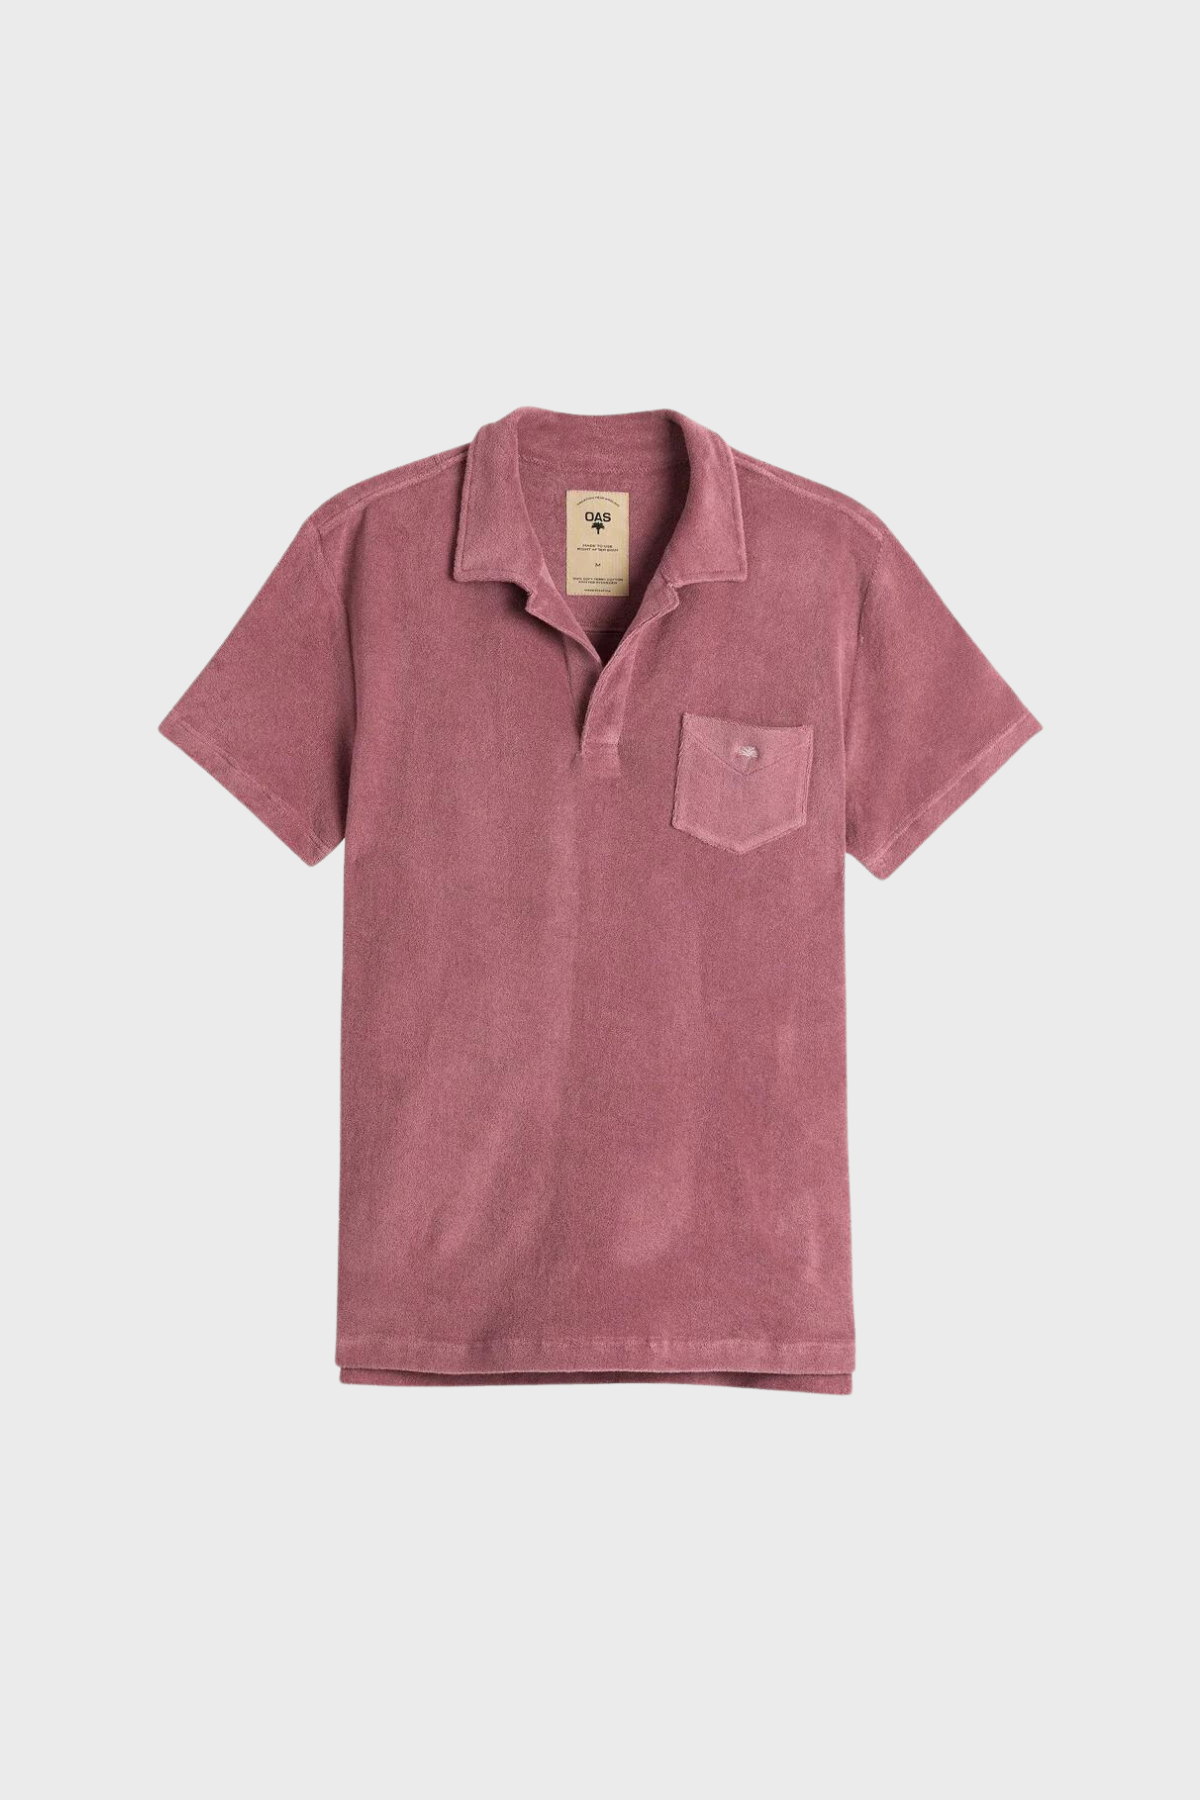 Polo Terry Shirt in Dusty Plum